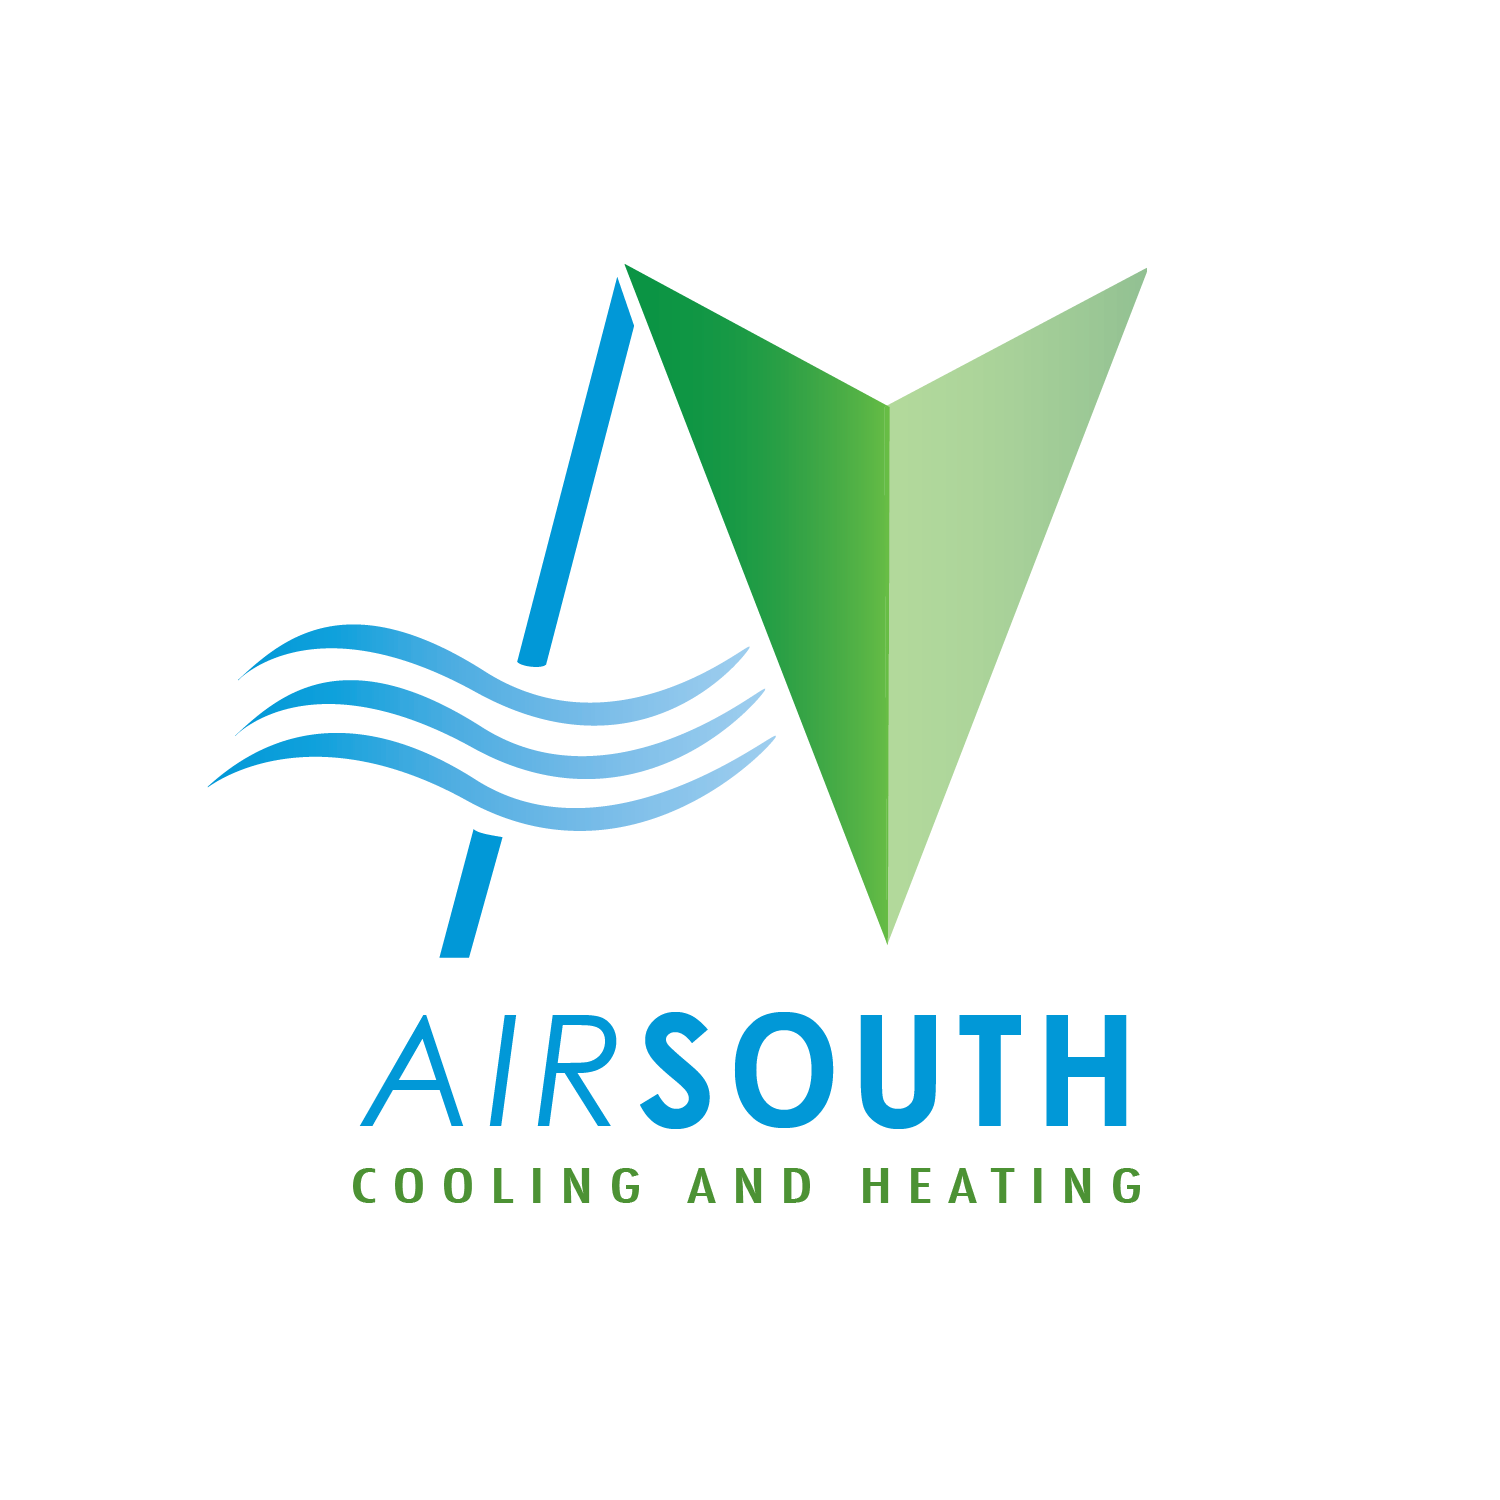 AirSouth Cooling and Heating Logo